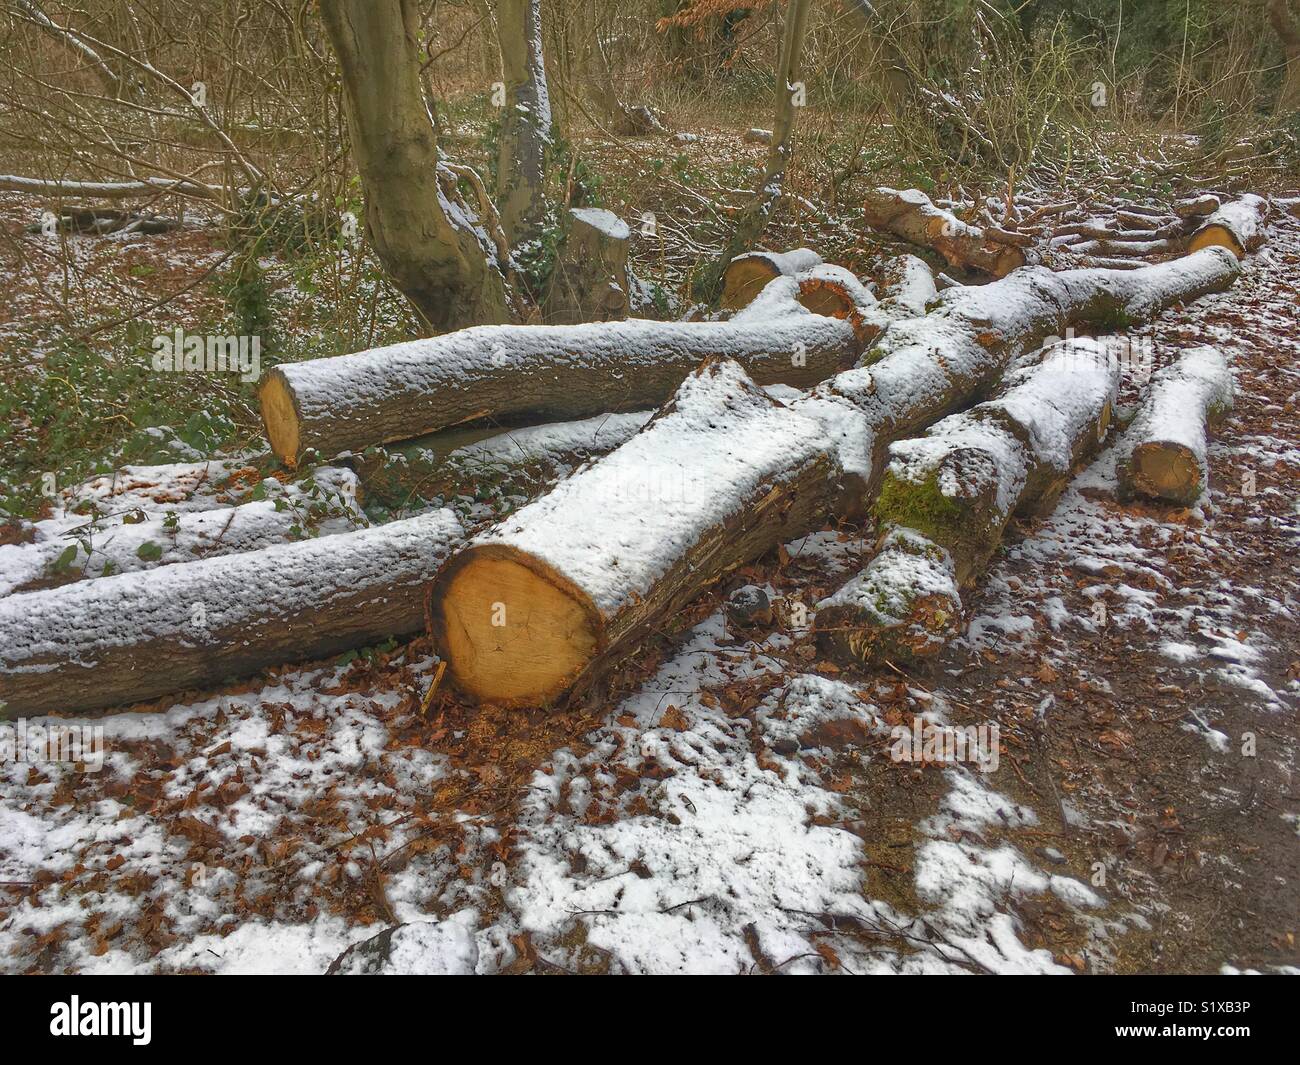 Logs with a light covering of snow Stock Photo